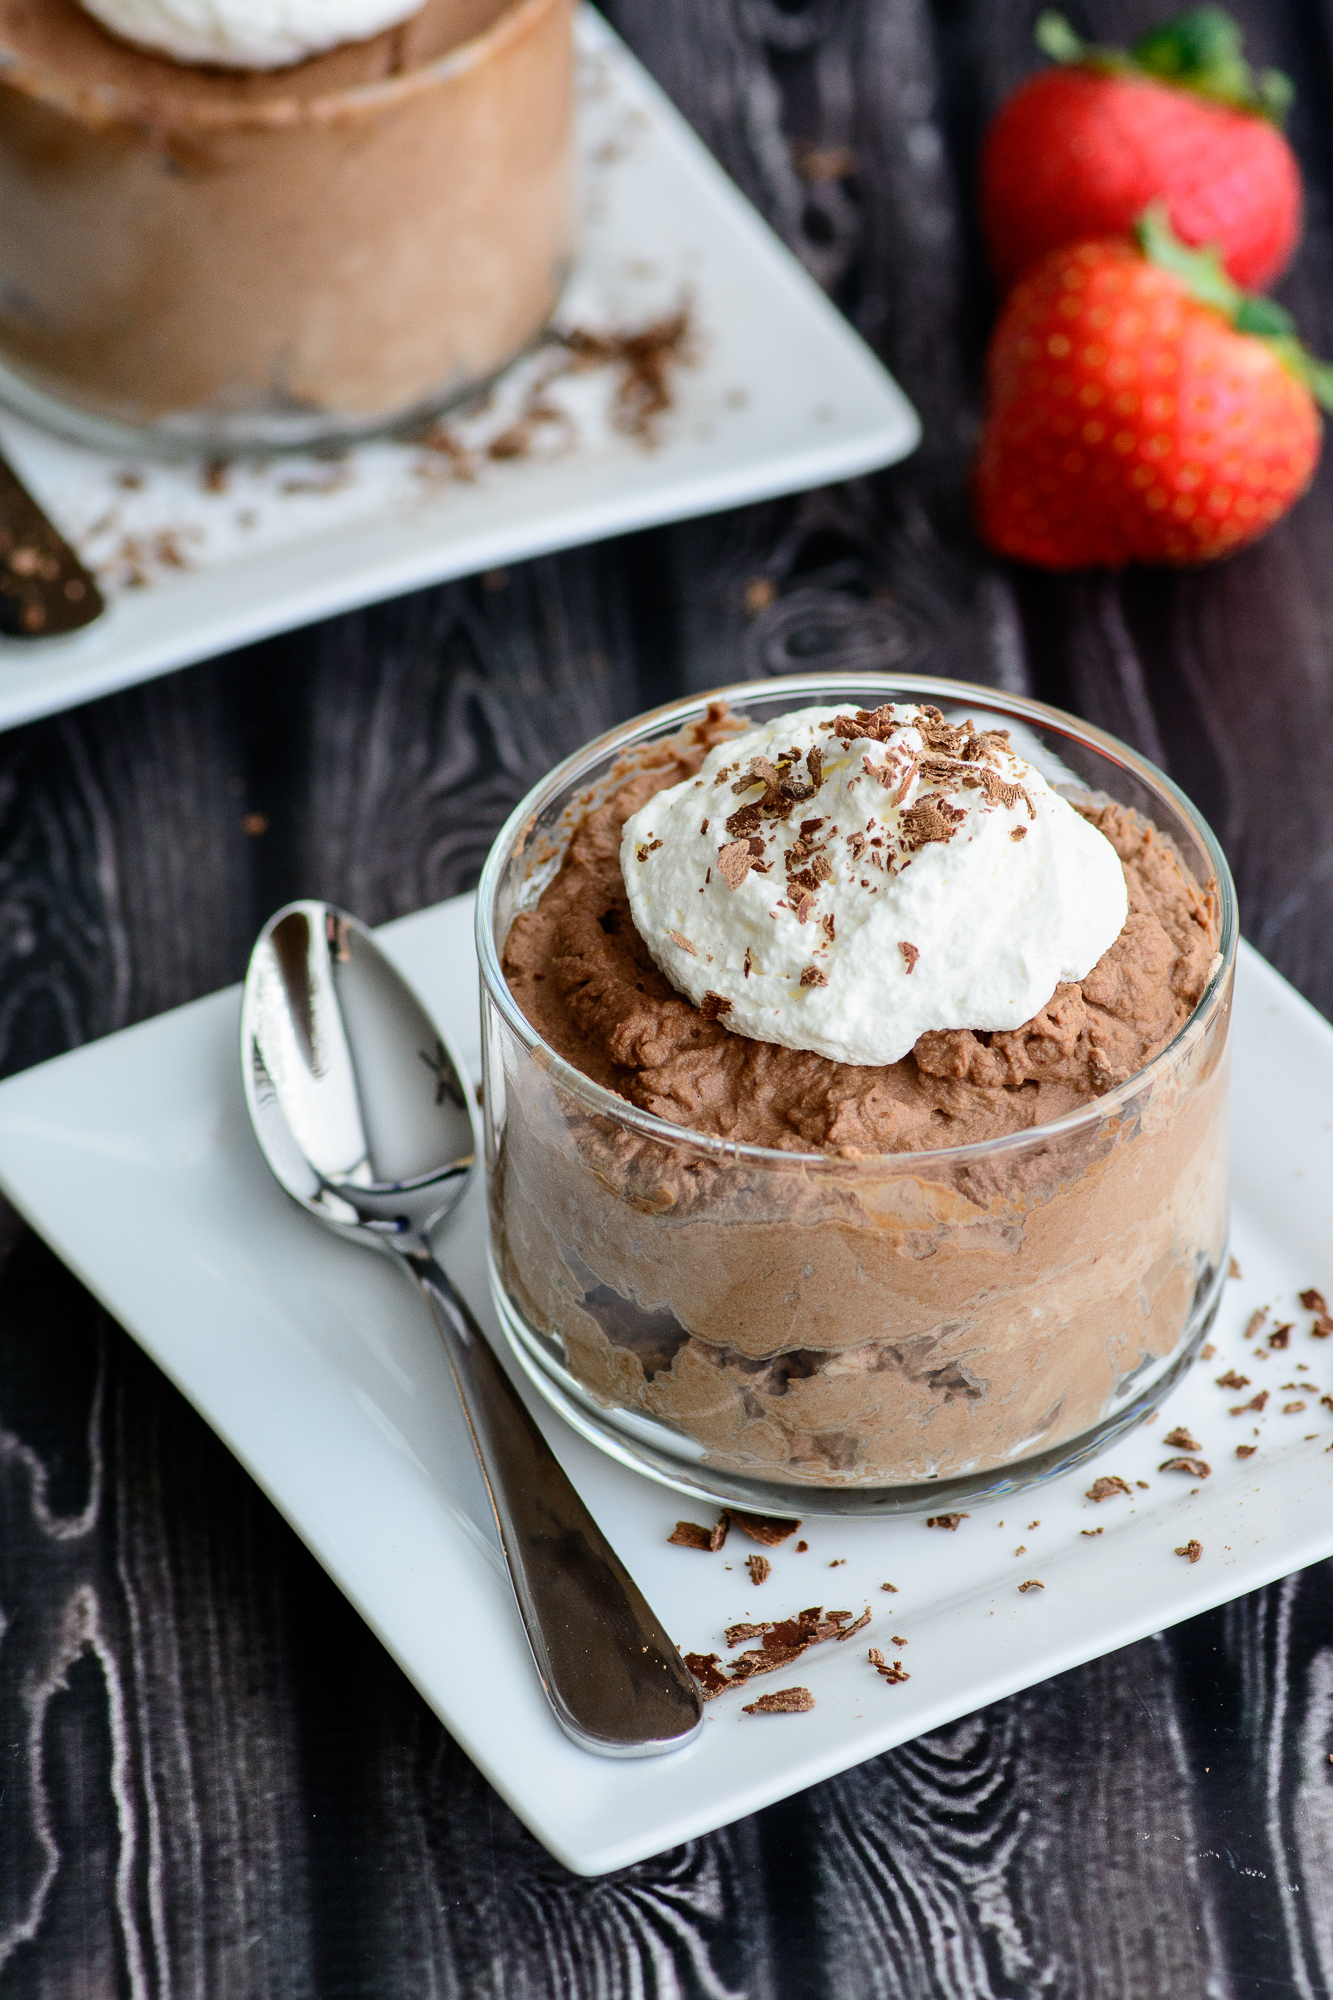 3 Ingredient Chocolate Mousse. No eggs, no fuss. Just 3 simple ingredients and a little mixing and you'll be on your way to indulging in this decadent chocolate mousse. Instructions for a paleo chocolate mousse included too!